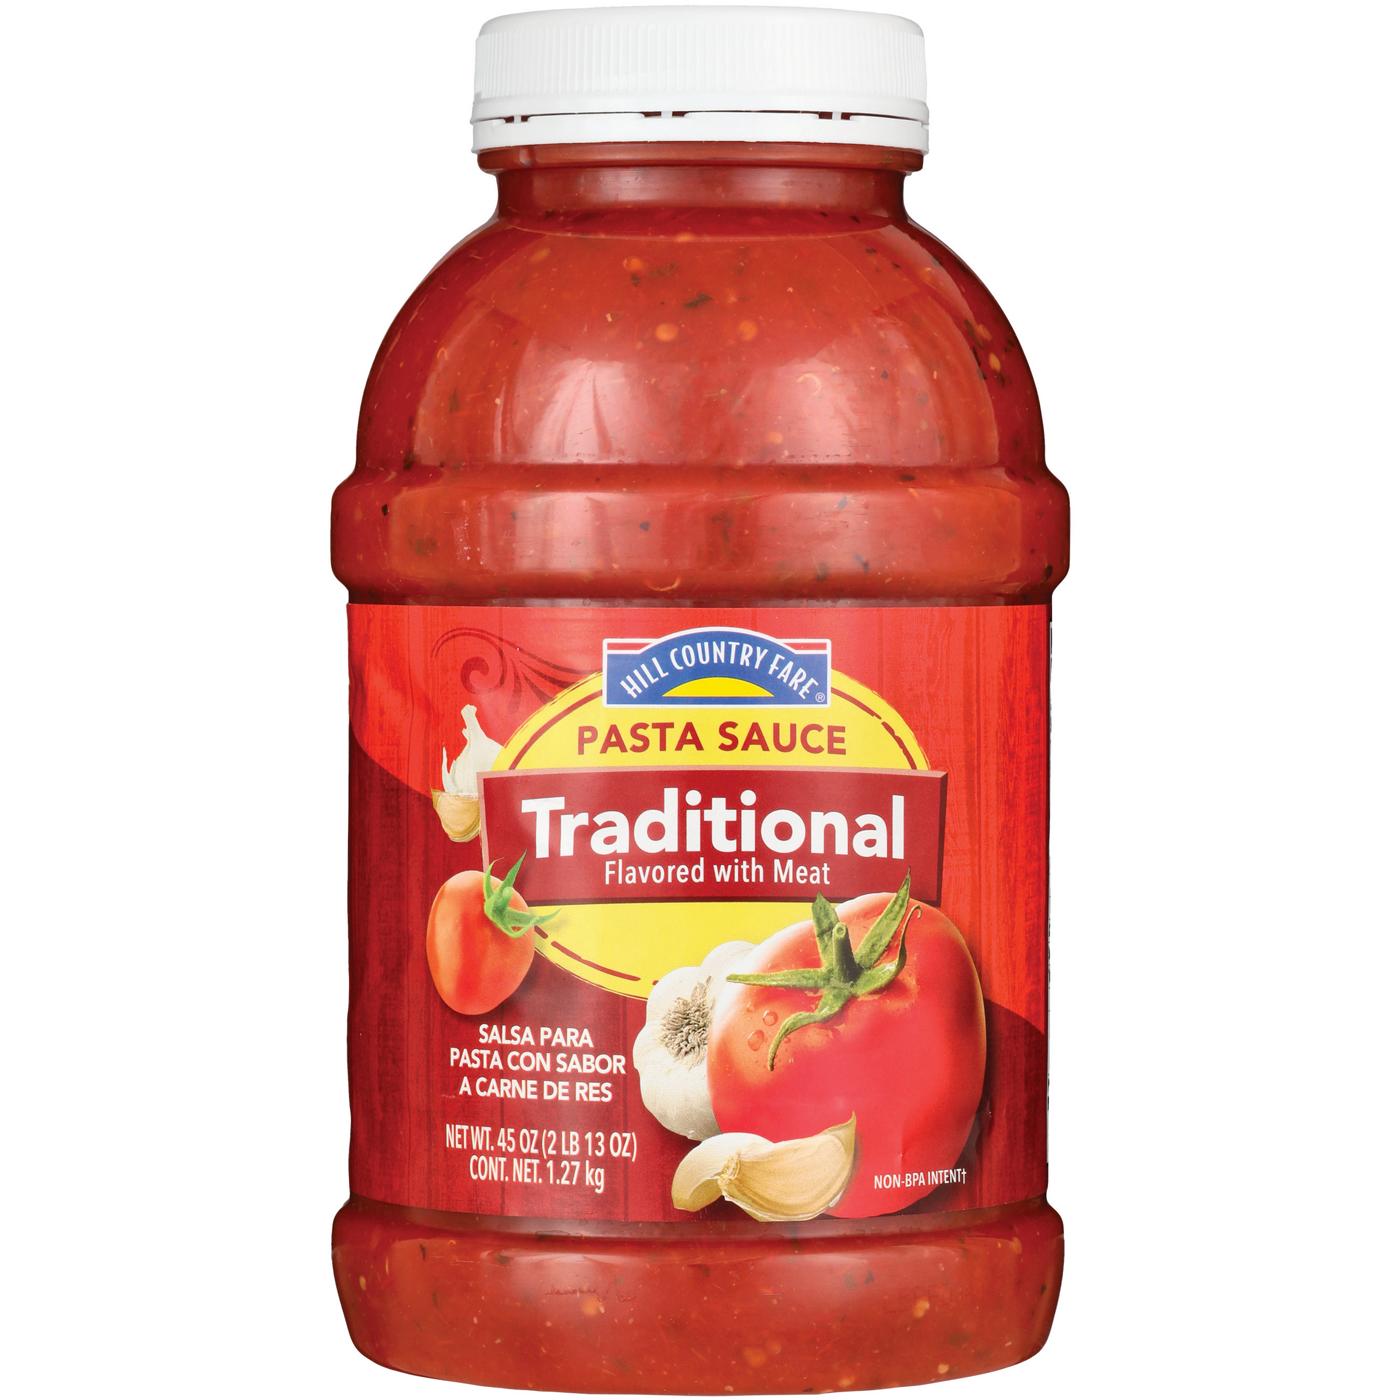 Hill Country Fare Pasta Sauce - Traditional Meat; image 1 of 2